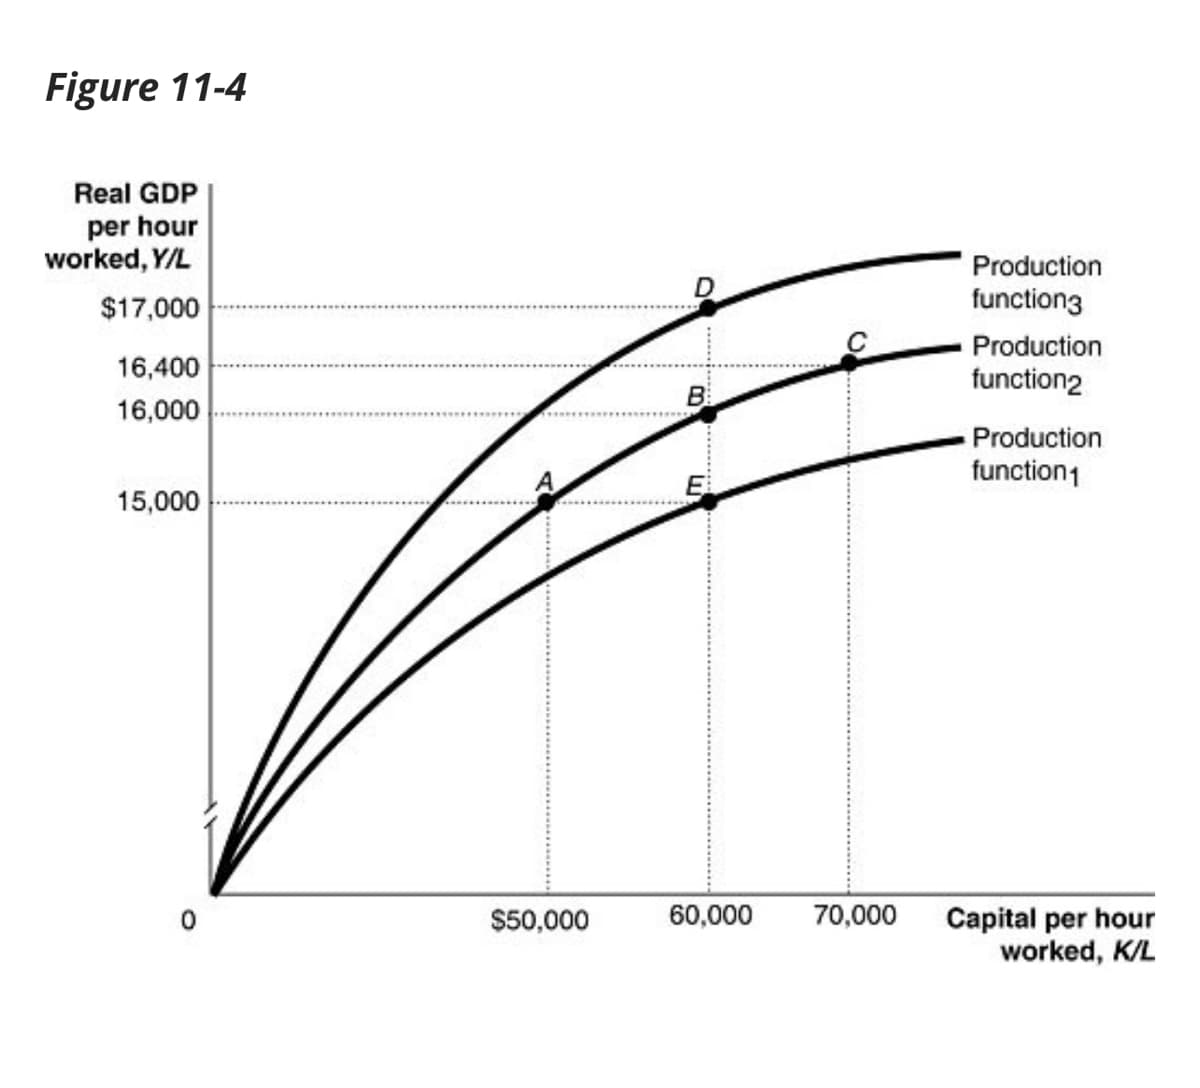 Figure 11-4
Real GDP
per hour
worked, Y/L
$17,000
16,400
16,000
15,000
$50,000
B
E
60,000 70,000
Production
function3
Production
function2
Production
function1
Capital per hour
worked, K/L